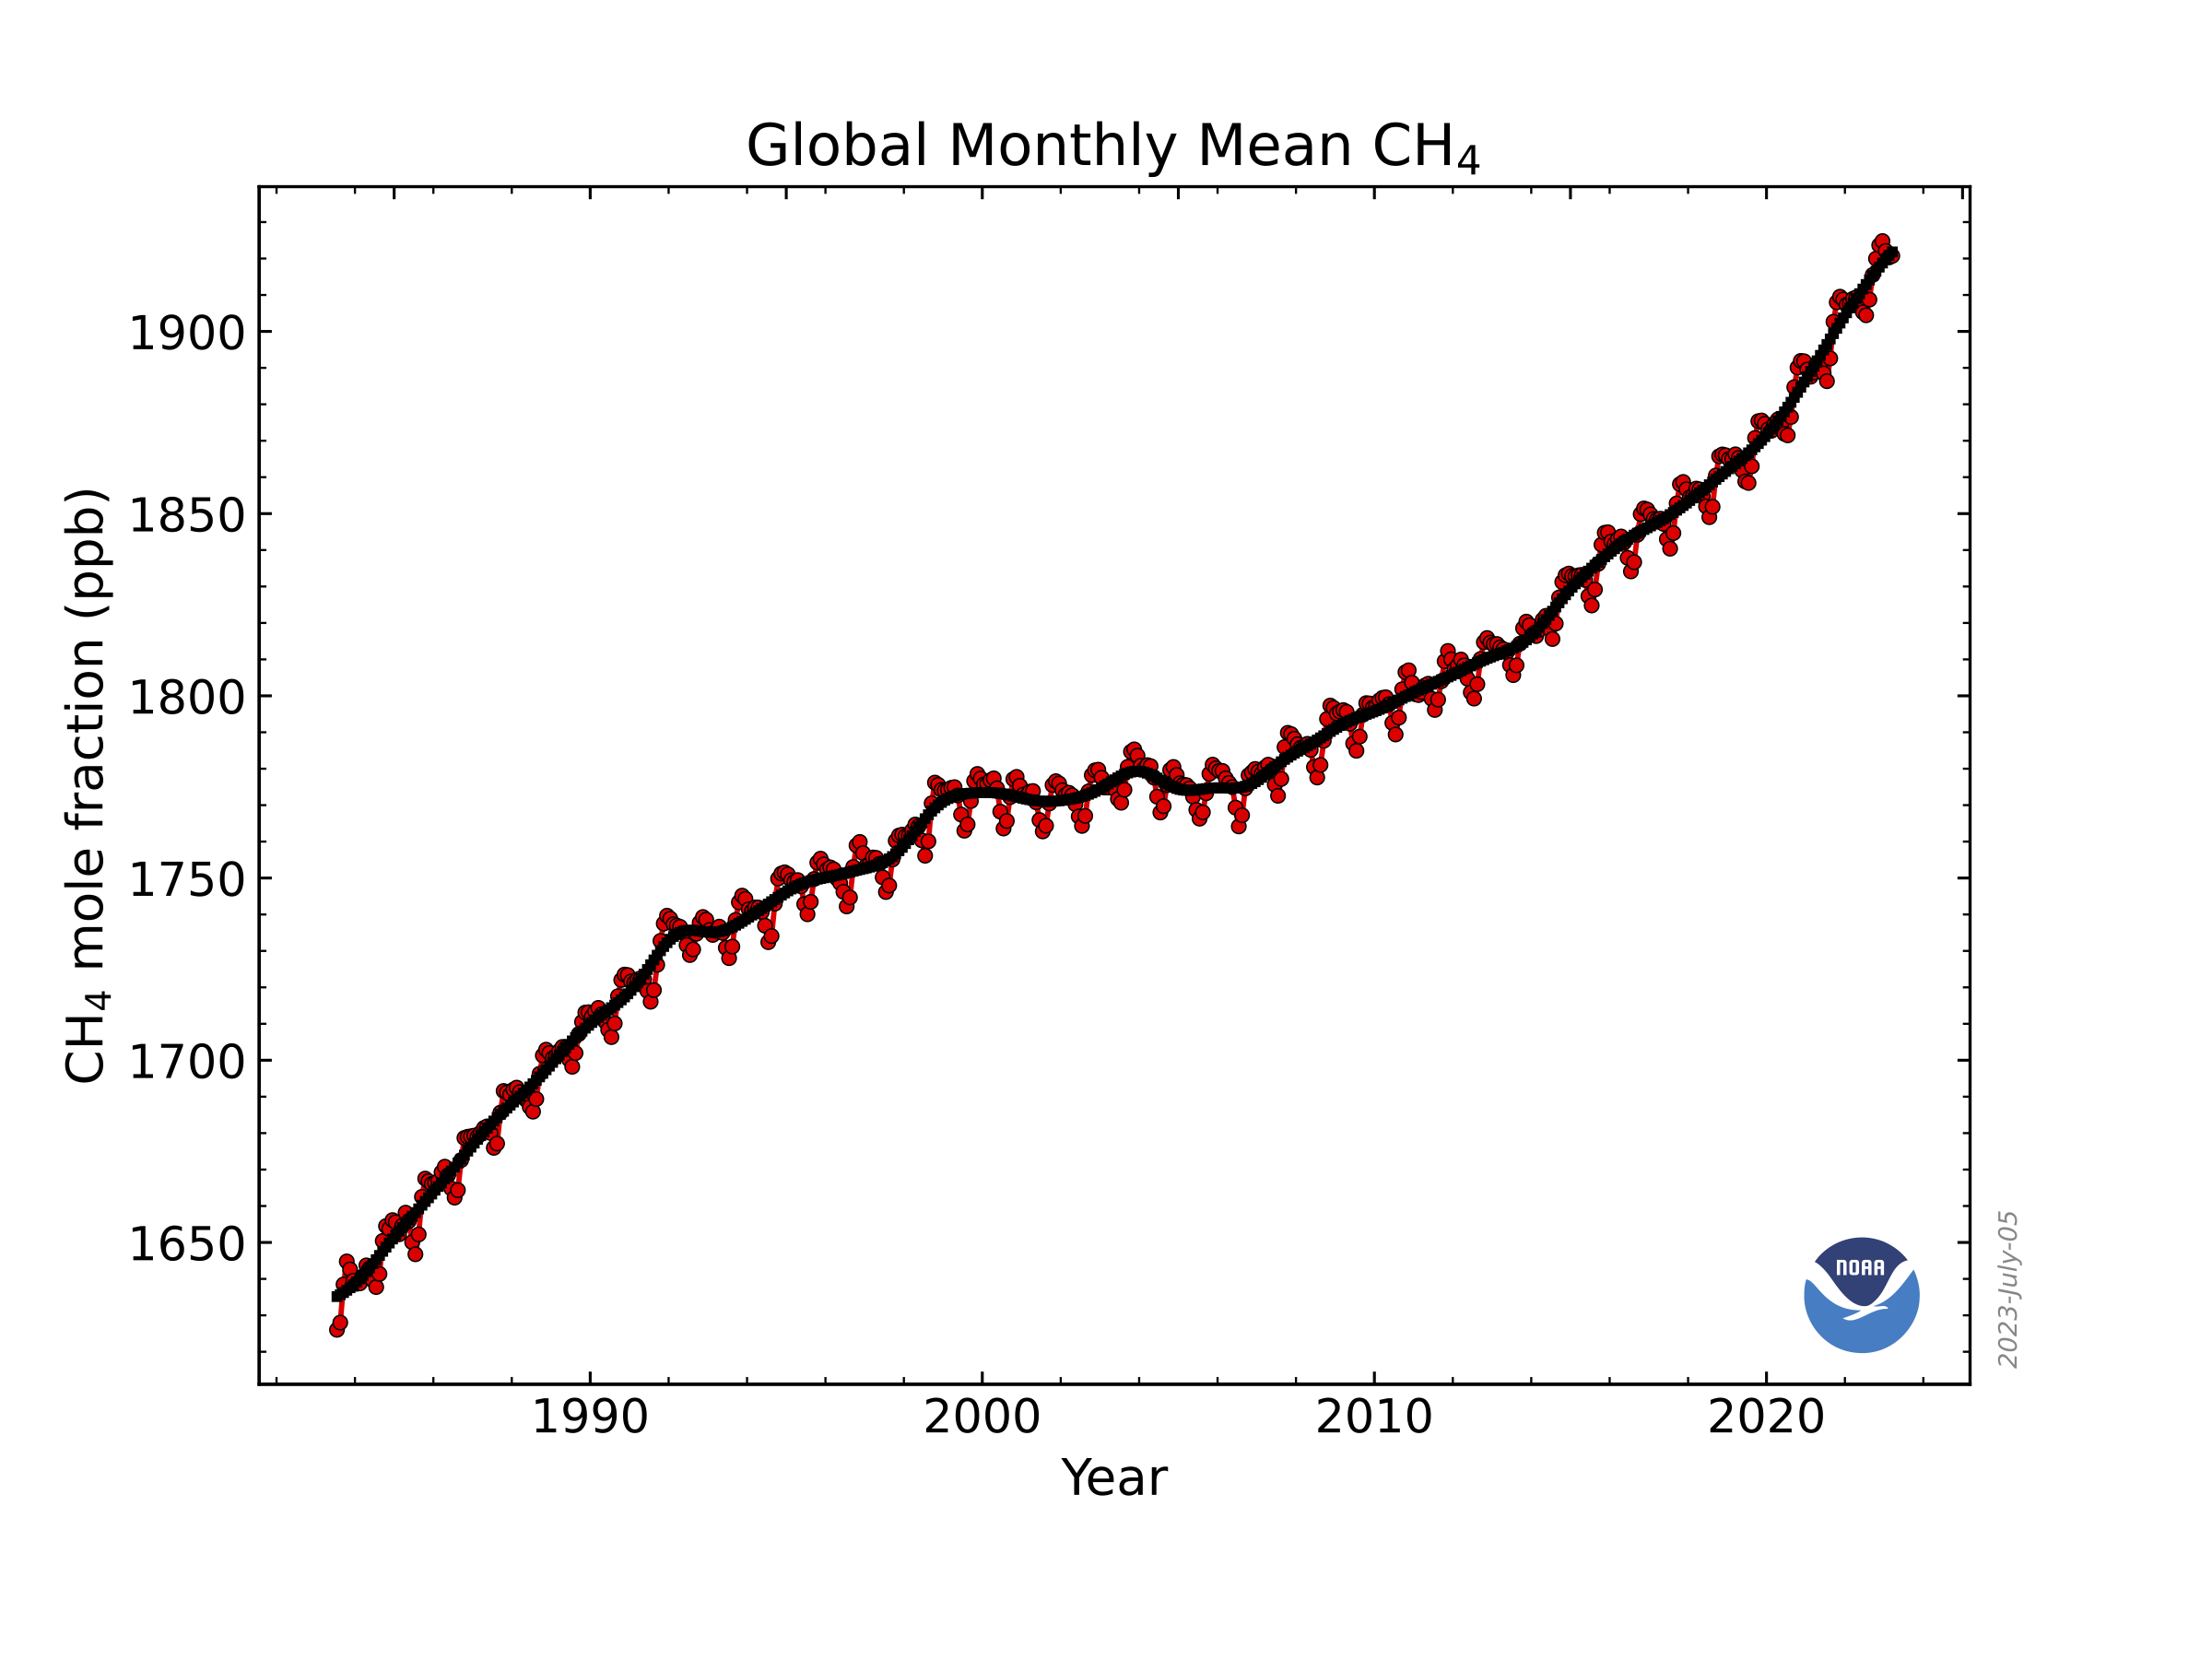 timeseries of global-mean methane from NOAA (https://gml.noaa.gov/webdata/ccgg/trends/ch4_trend_all_gl.png)